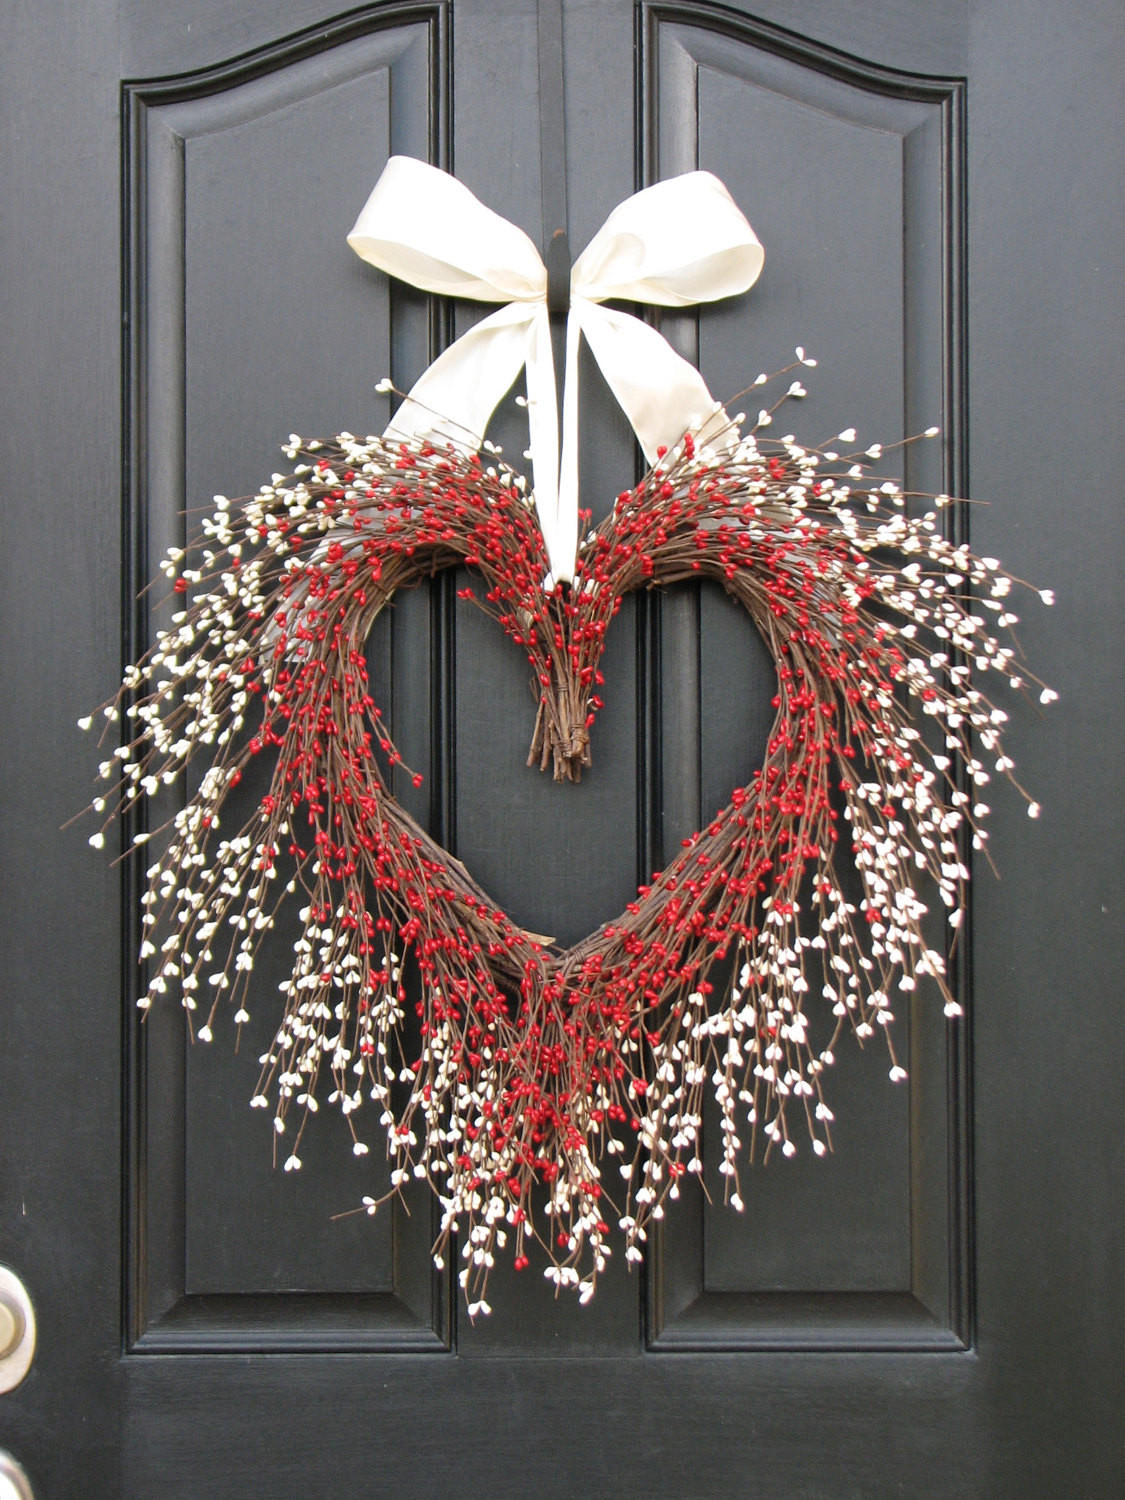 Valentines Day Wreath Ideas
 The Kissing Wreath Door Wreaths Valentine s Day Wreath